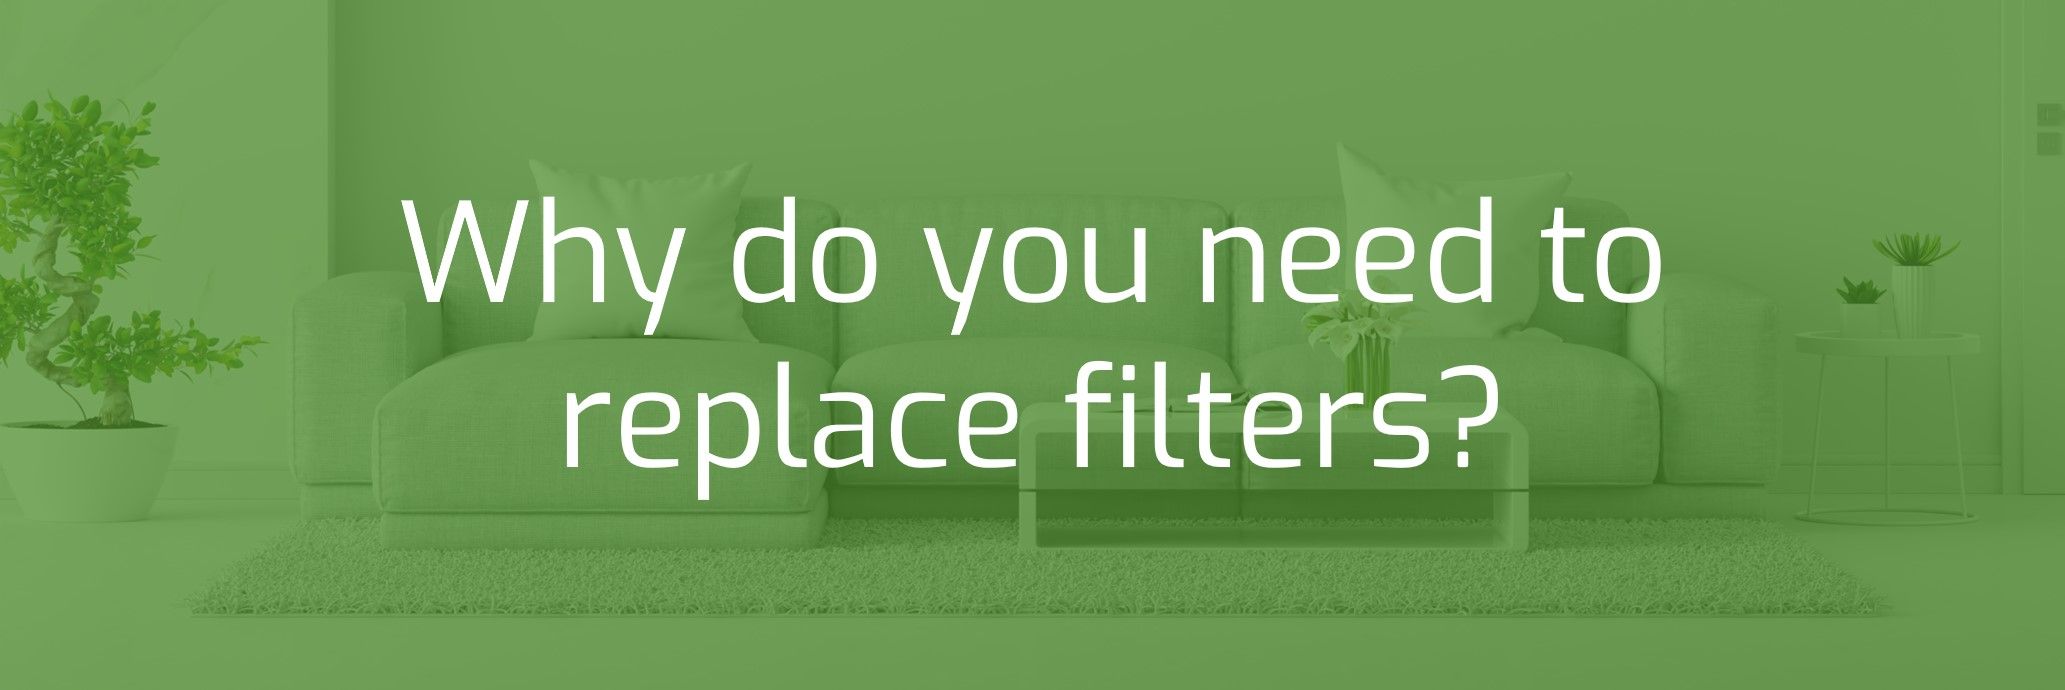 Why do you need to replace filters?